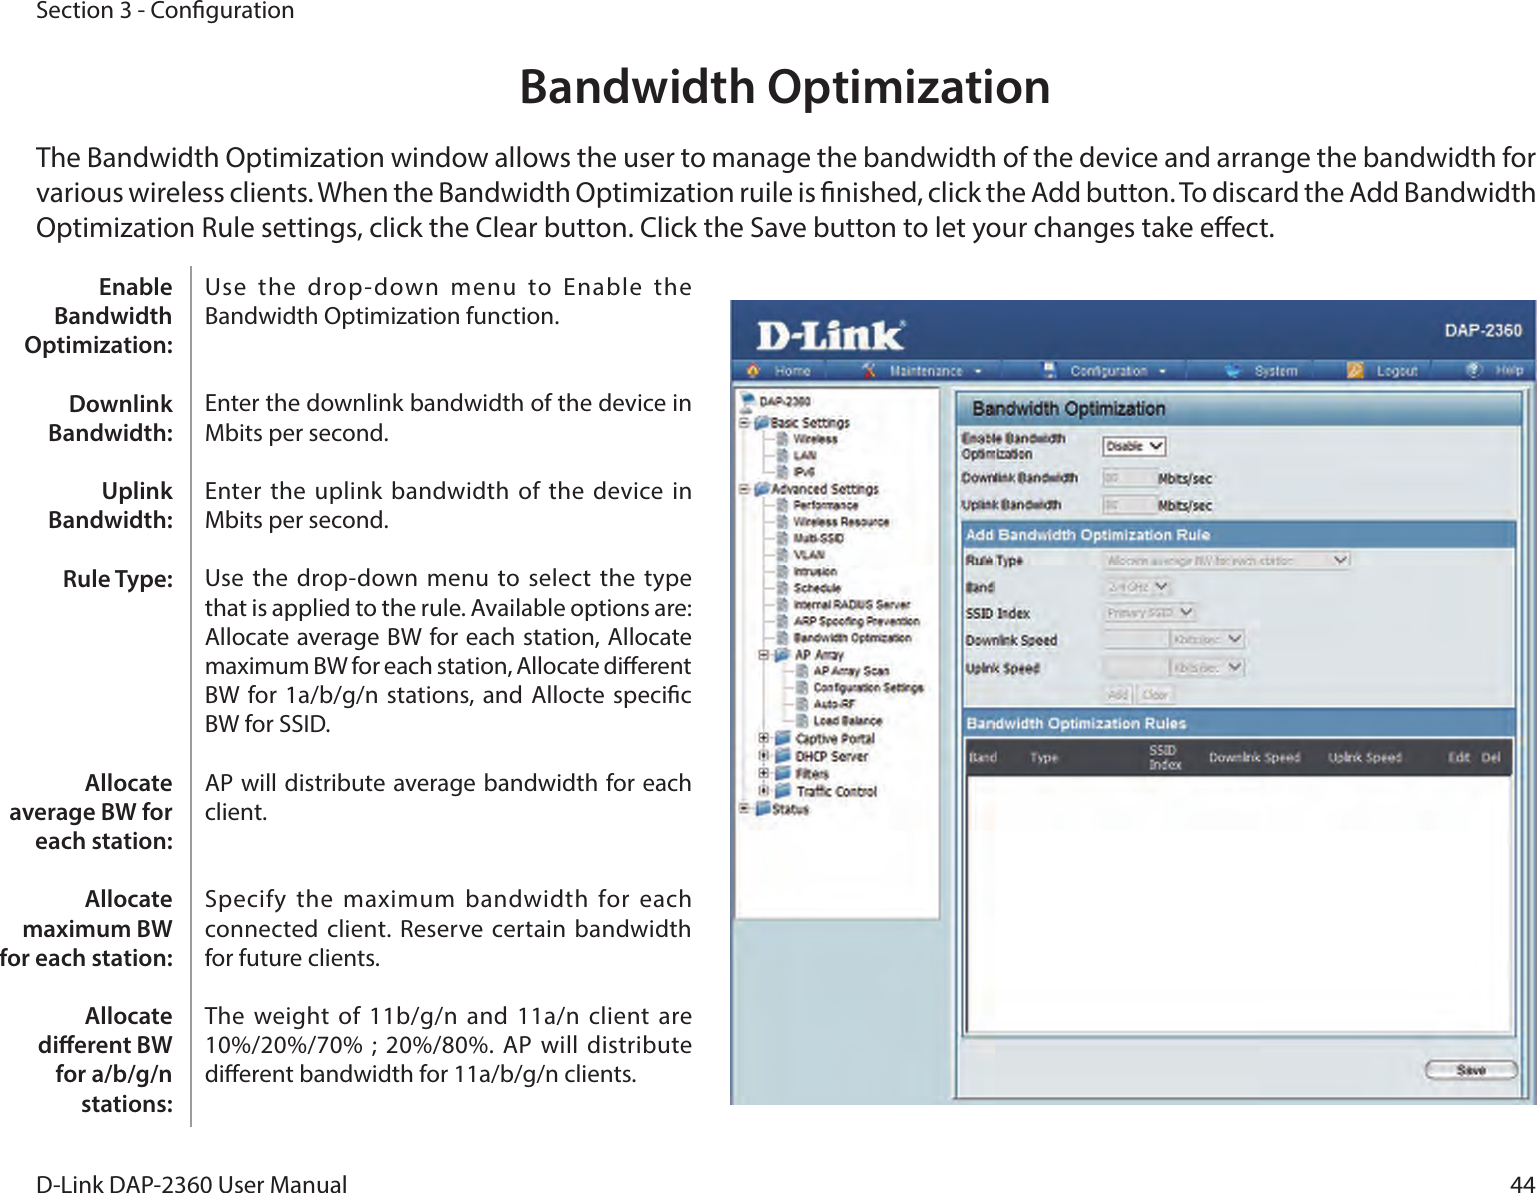 44D-Link DAP-2360 User ManualSection 3 - CongurationBandwidth OptimizationThe Bandwidth Optimization window allows the user to manage the bandwidth of the device and arrange the bandwidth for various wireless clients. When the Bandwidth Optimization ruile is nished, click the Add button. To discard the Add Bandwidth Optimization Rule settings, click the Clear button. Click the Save button to let your changes take eect.Use  the  drop-down  menu  to  Enable  the Bandwidth Optimization function. Enter the downlink bandwidth of the device in Mbits per second.Enter the uplink bandwidth of the  device in Mbits per second.Use the drop-down menu to select the type that is applied to the rule. Available options are: Allocate average BW for each station, Allocate maximum BW for each station, Allocate dierent BW for 1a/b/g/n  stations, and Allocte specic BW for SSID. AP will distribute average bandwidth for each client.Specify the maximum bandwidth for each connected client. Reserve certain bandwidth for future clients.The weight of 11b/g/n and 11a/n client  are 10%/20%/70% ; 20%/80%. AP will  distribute dierent bandwidth for 11a/b/g/n clients. Enable Bandwidth Optimization:Downlink Bandwidth:Uplink Bandwidth:Rule Type:Allocate average BW for each station:Allocate maximum BW for each station: Allocate dierent BW for a/b/g/n stations: